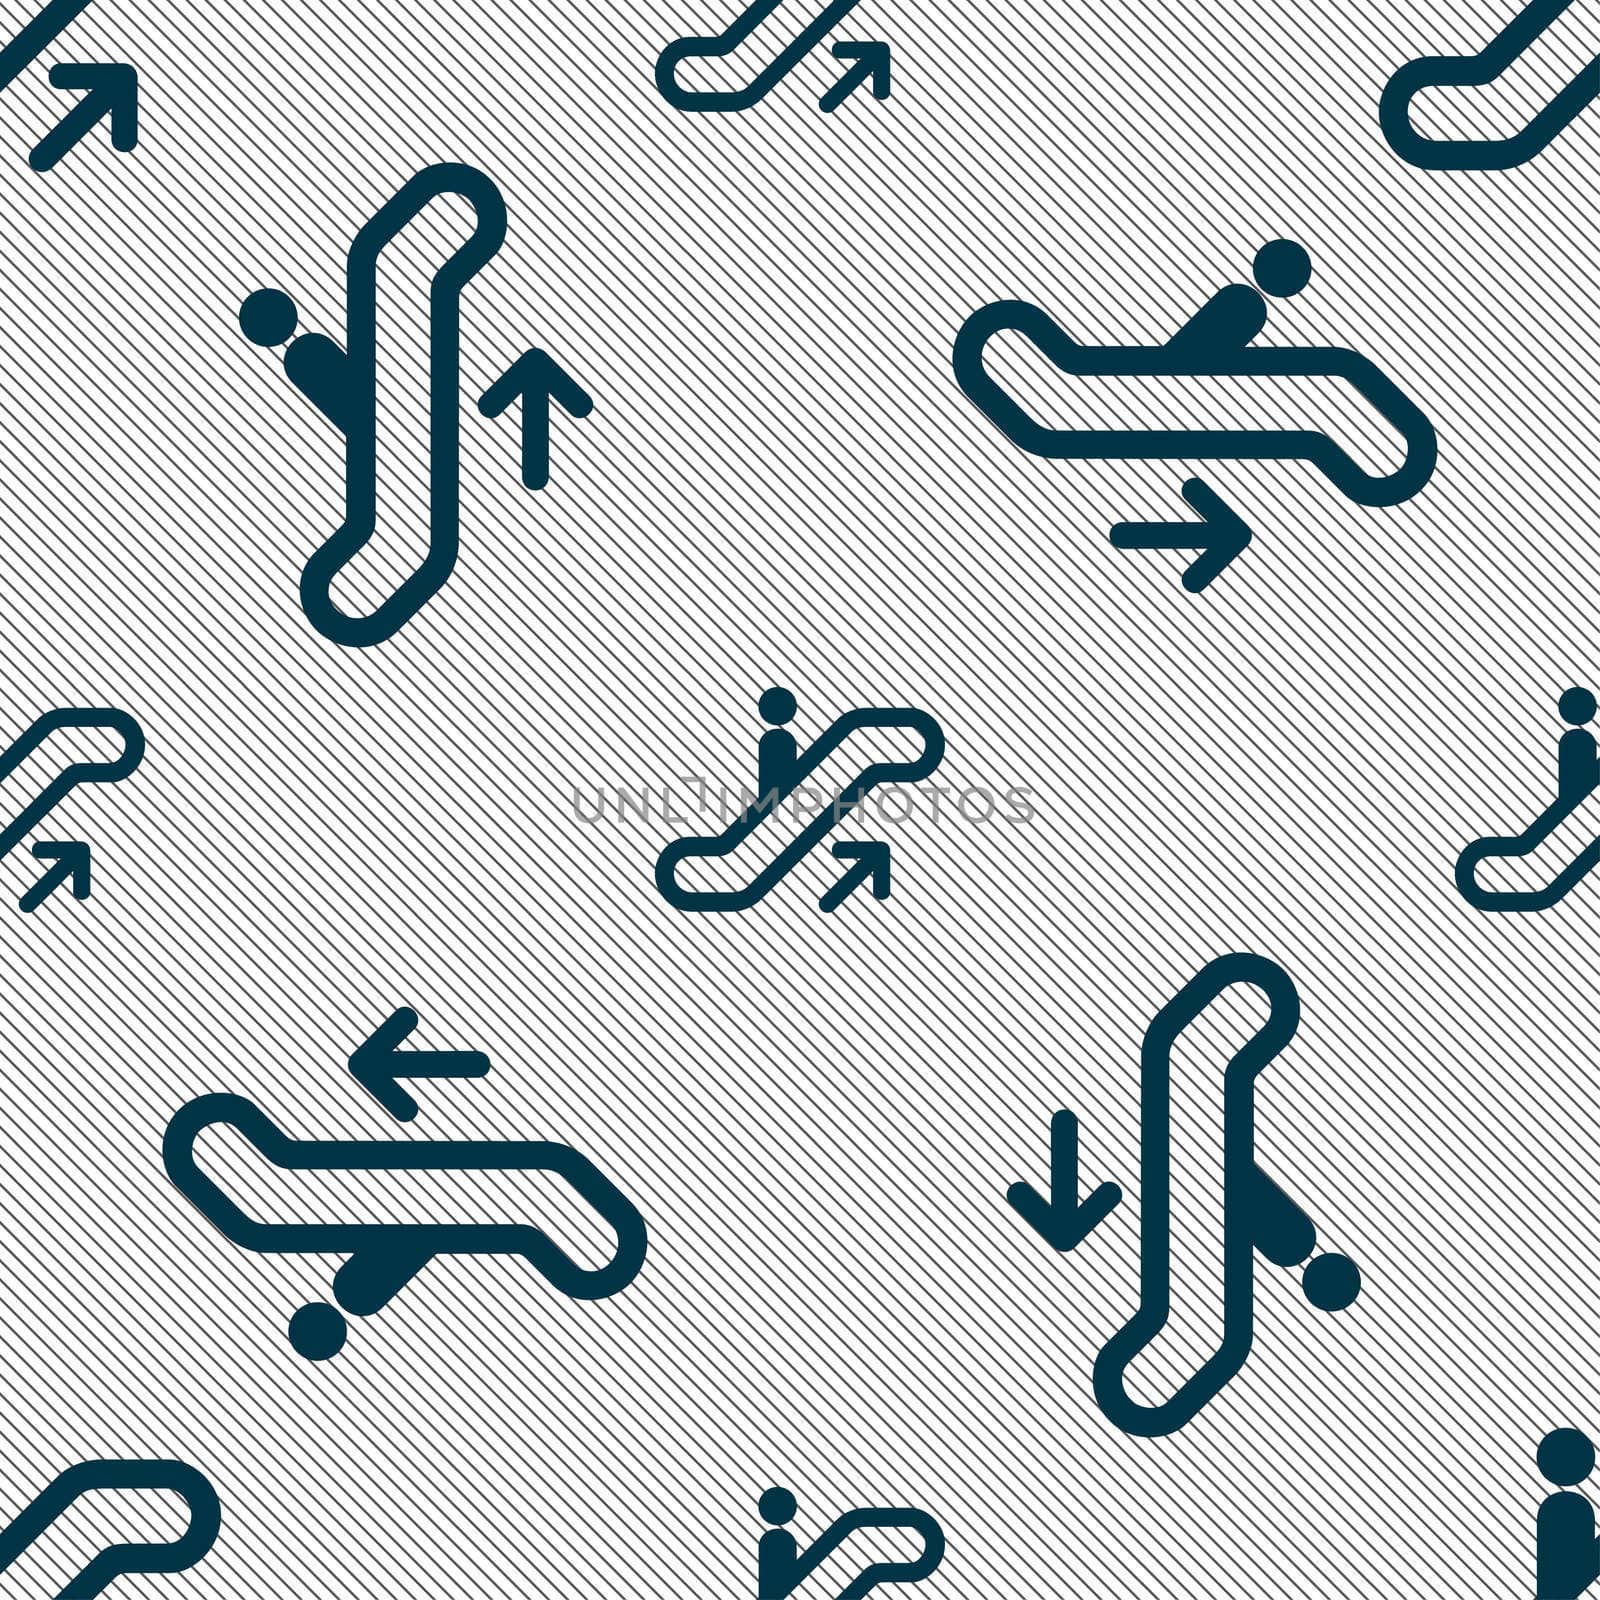 elevator, Escalator, Staircase icon sign. Seamless pattern with geometric texture.  by serhii_lohvyniuk